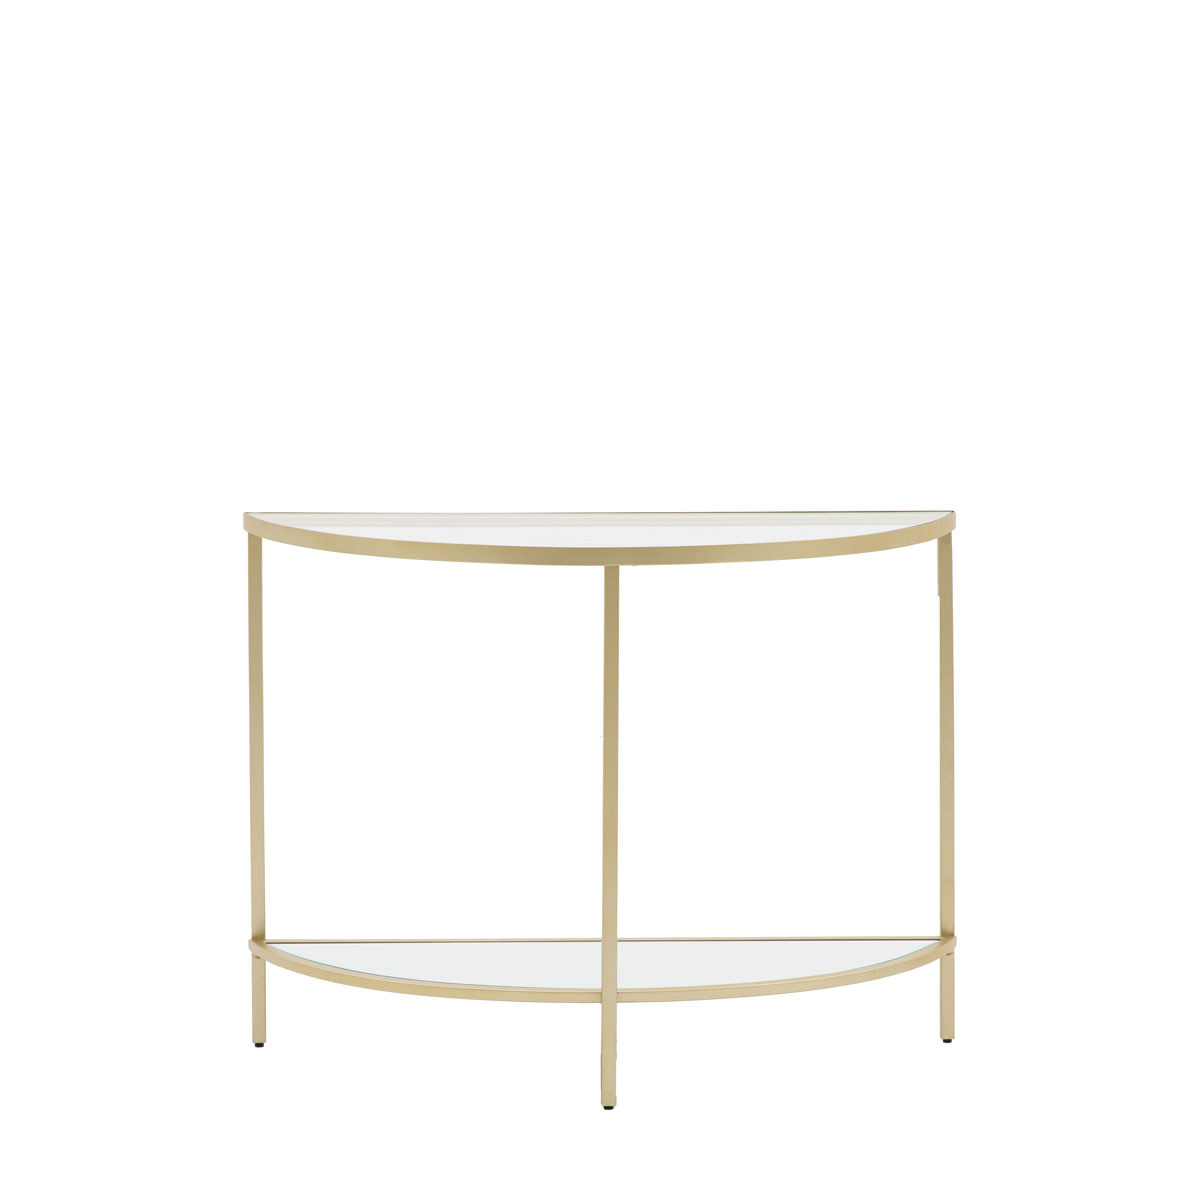 Hudson Console Table Champagne 1000x350x750mm